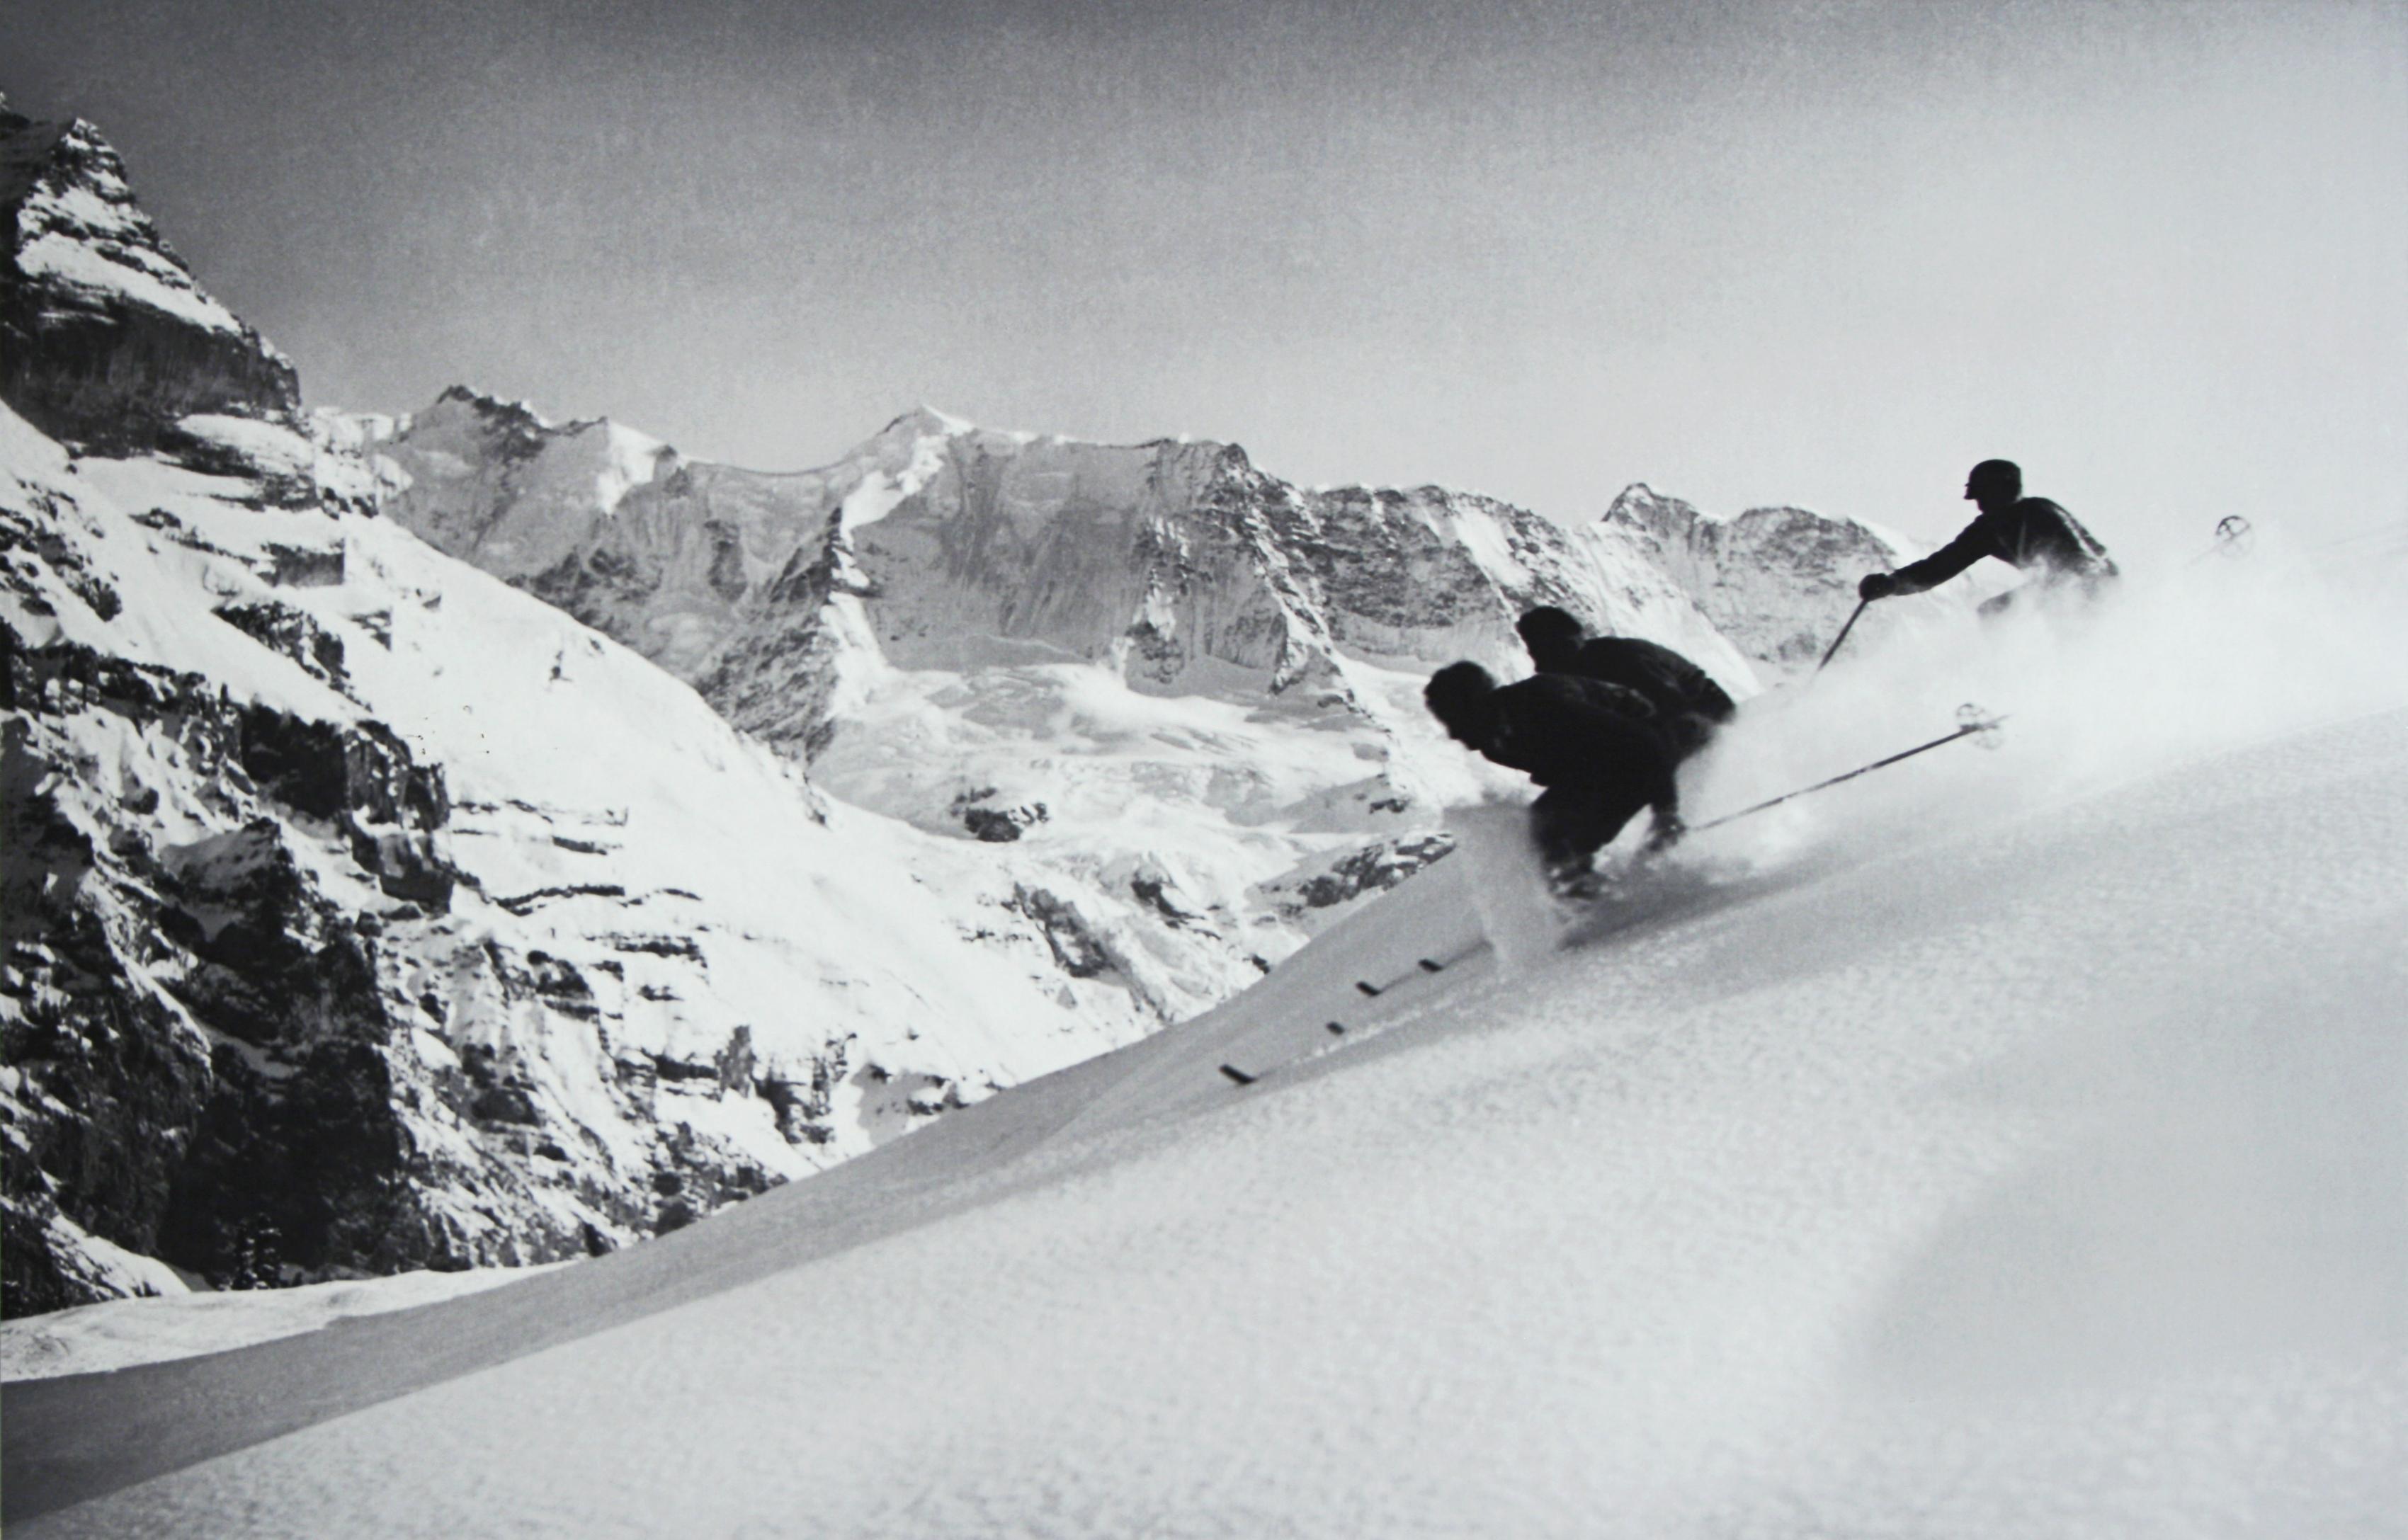 Alpine Ski photograph.
'SCHUSS' Murren, Switzerland, a new mounted black and white photographic image after an original 1930s skiing photograph. Prior to being a recreational activity skiing was purely a means of travelling from A to B through the